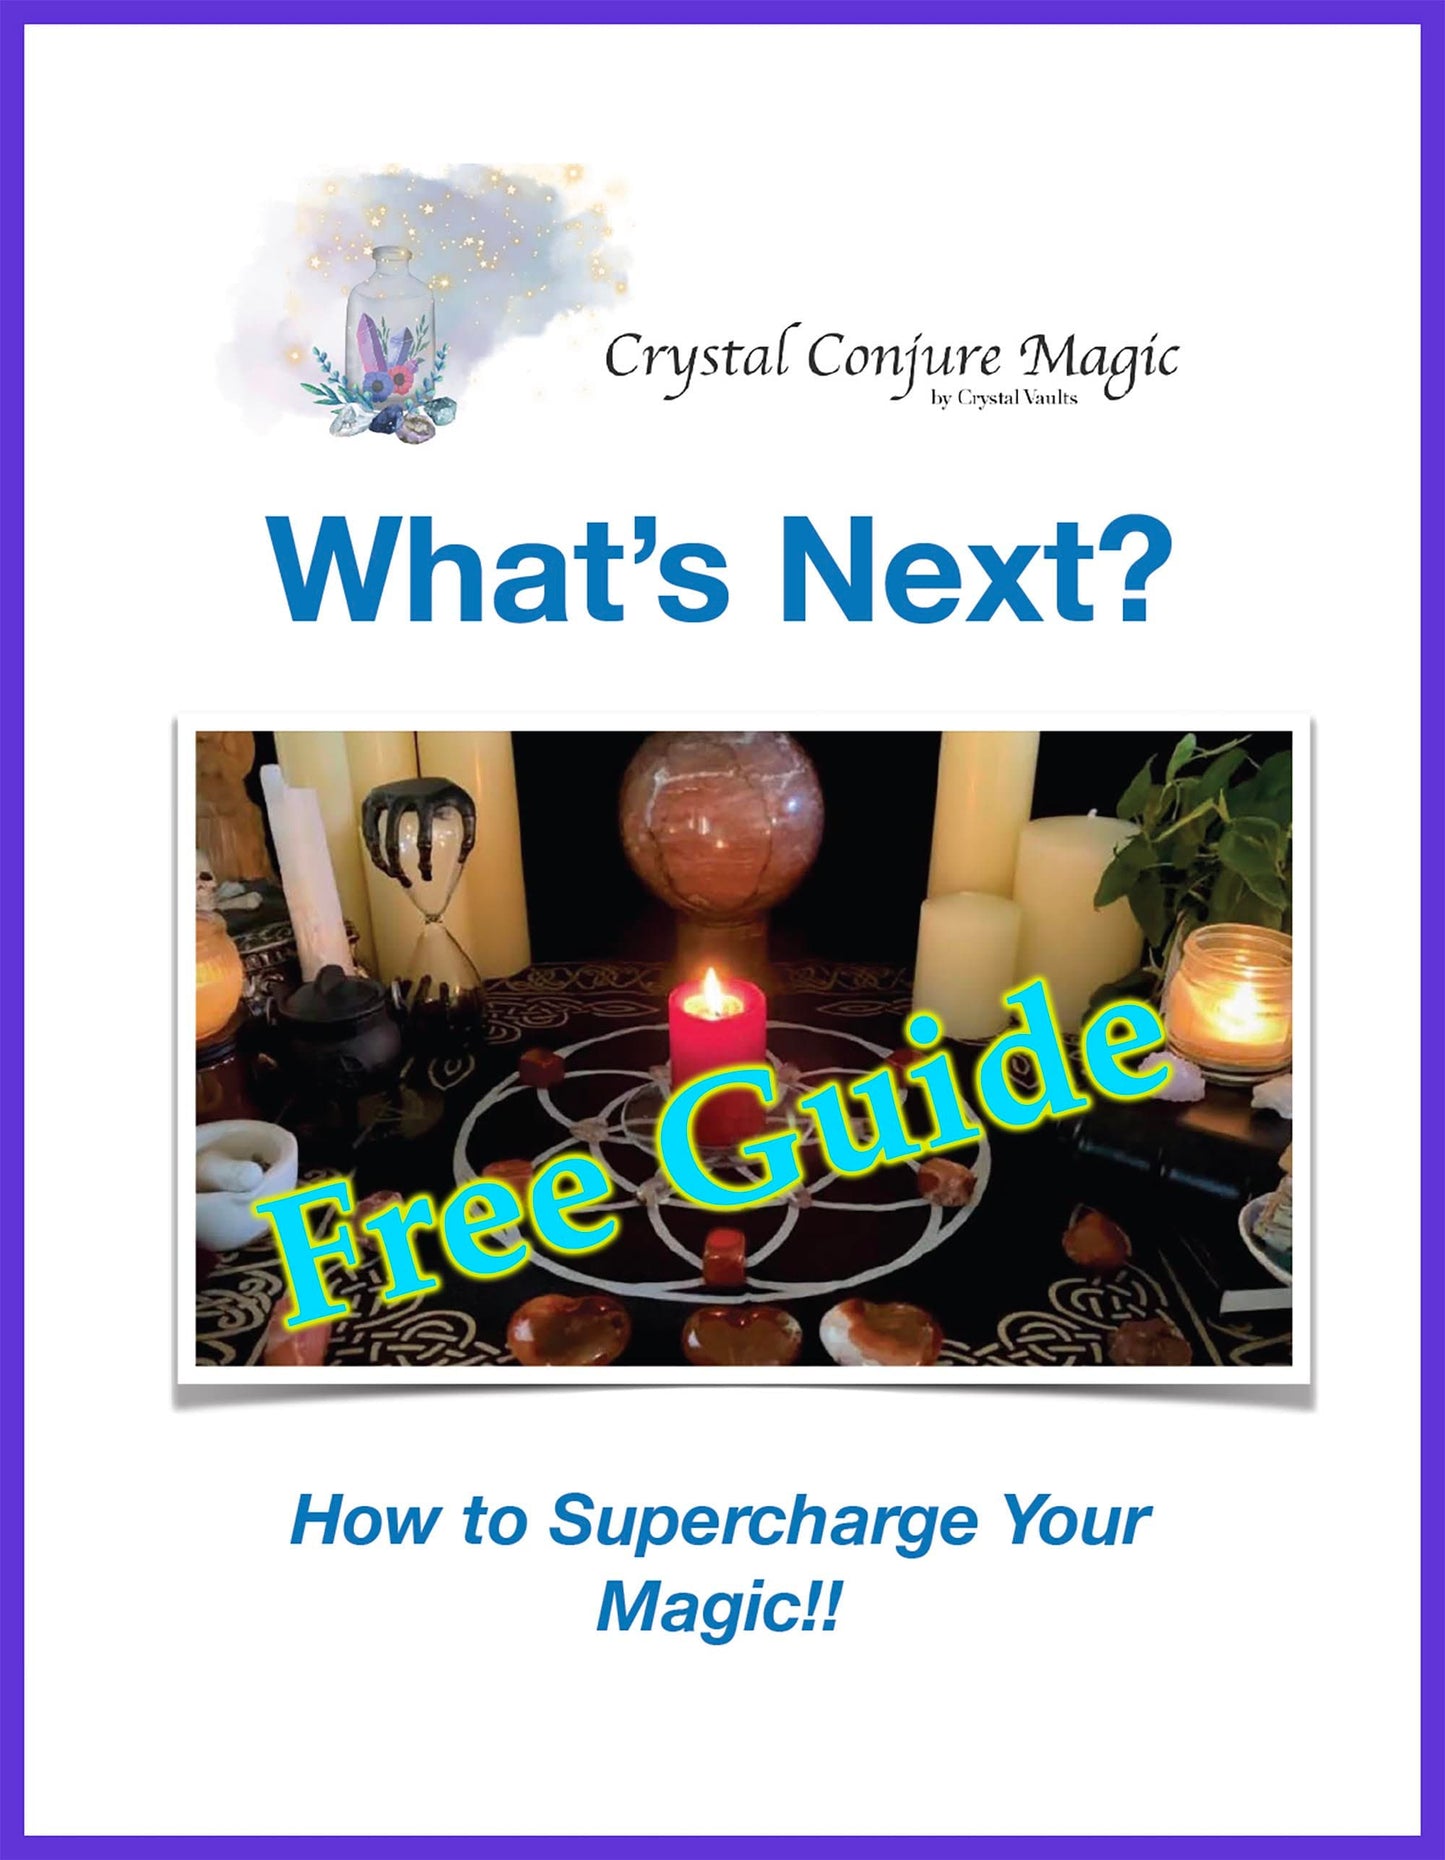 Bright Future Spell - Live the Dream, Get started with the magic of a wonderful life ahead